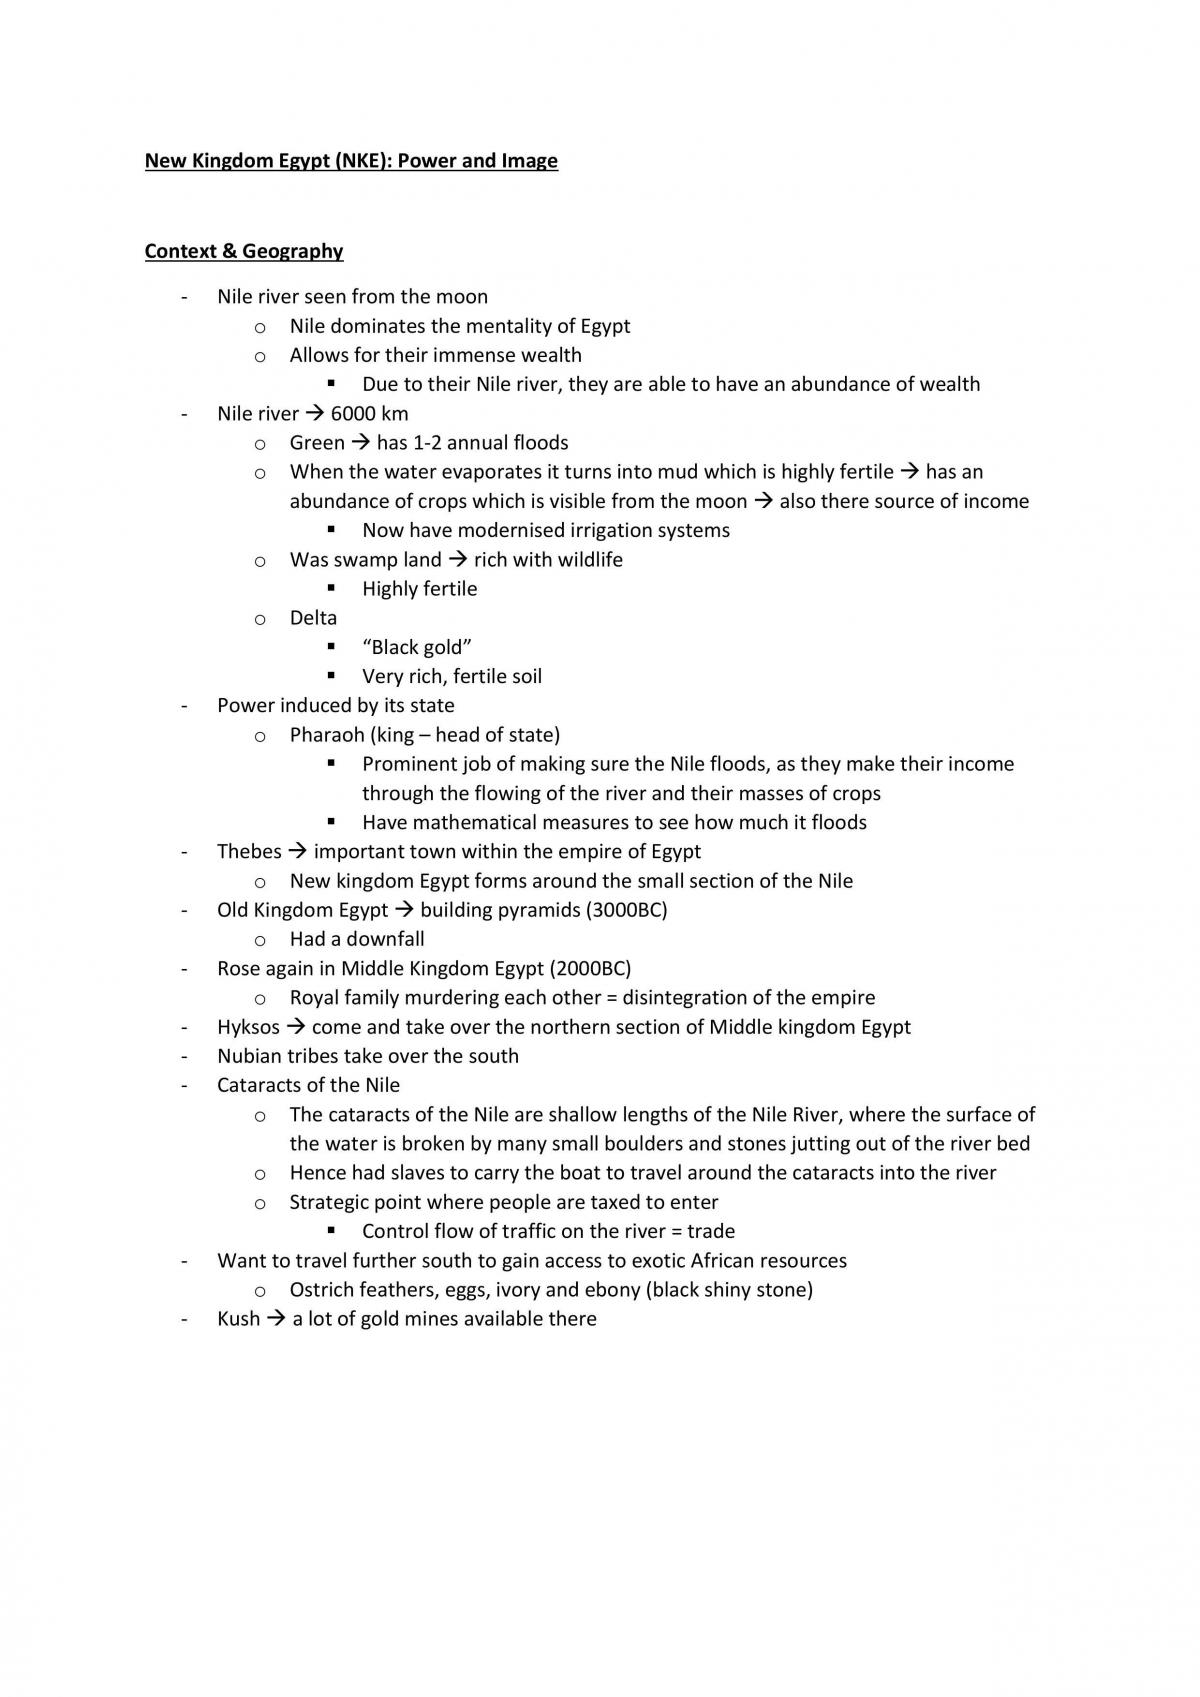 Ancient History - New Kingdom Egypt Notes - Page 1